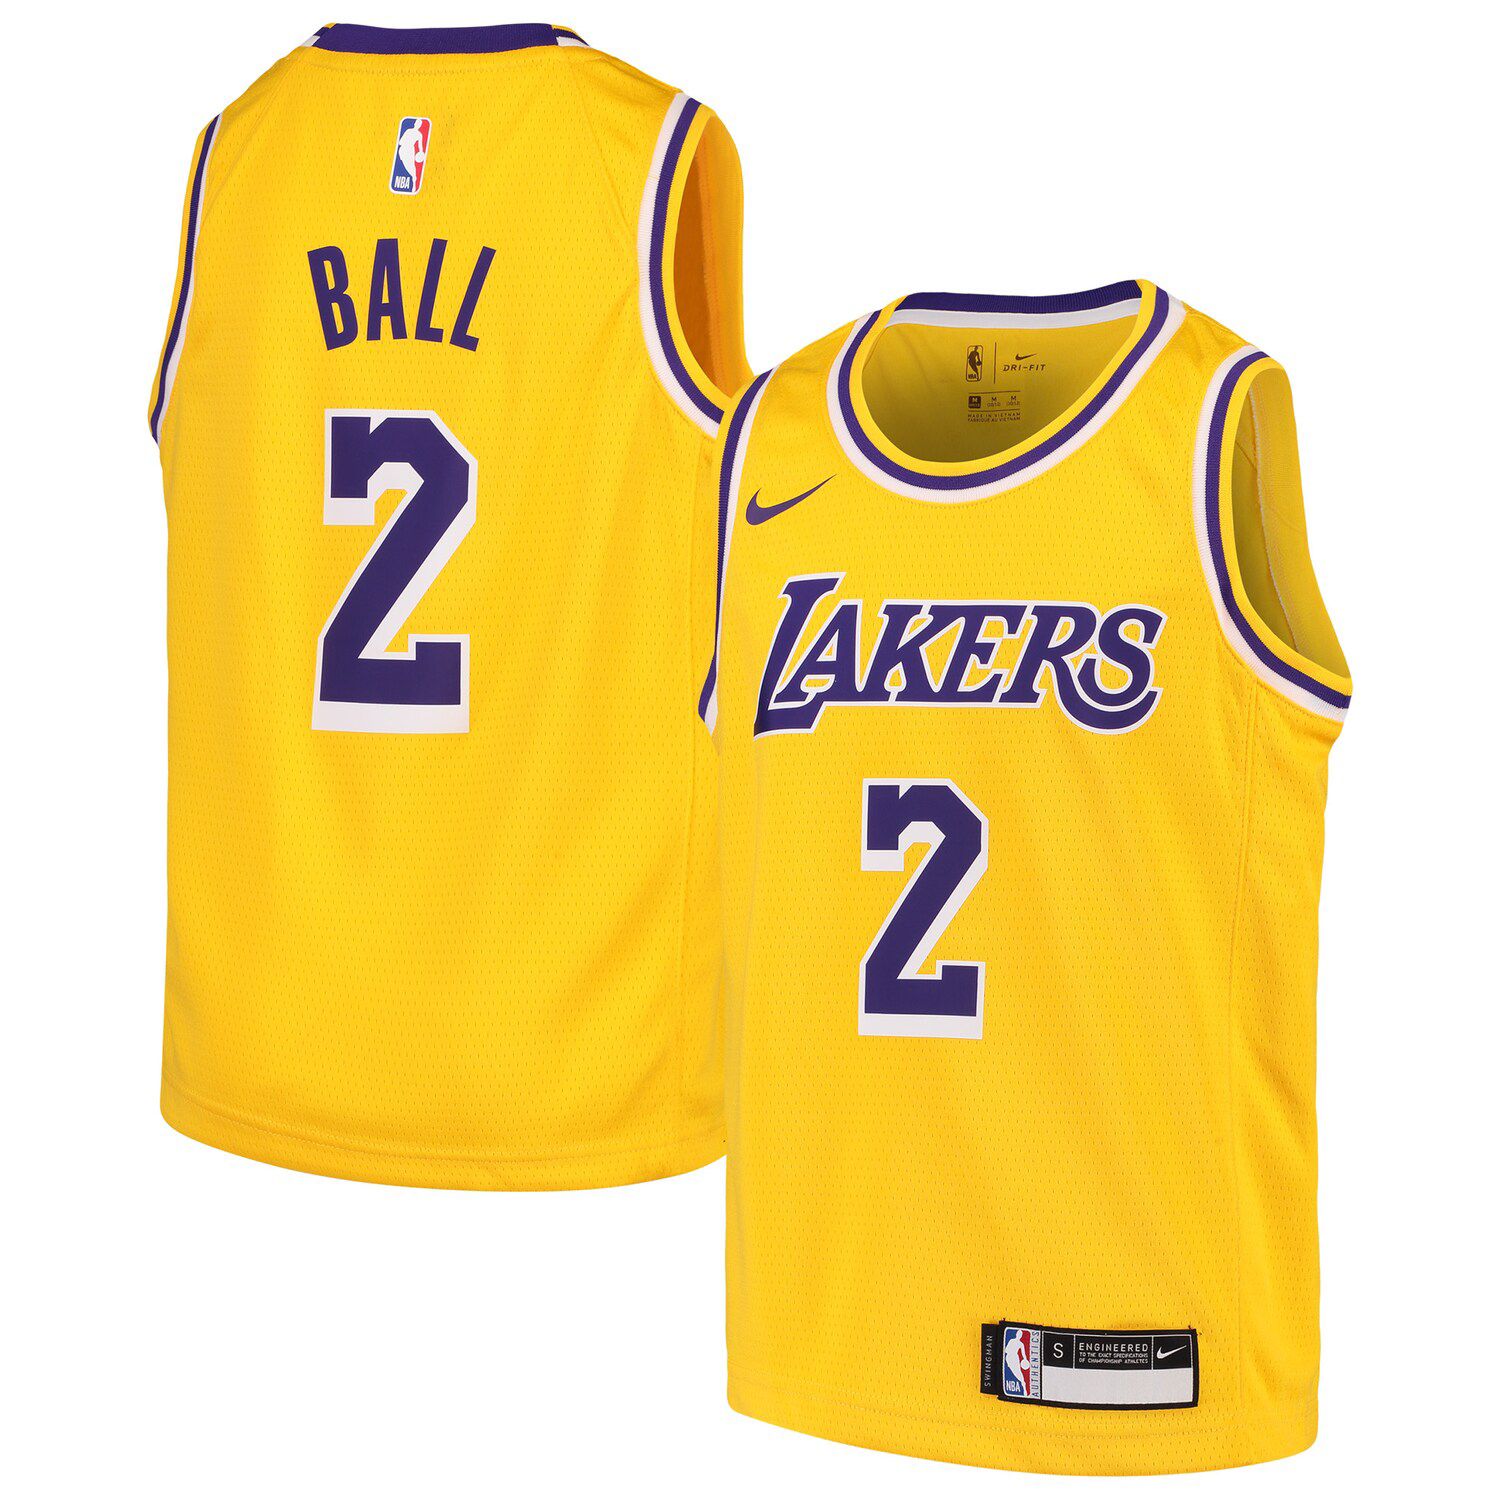 lakers gear for kids